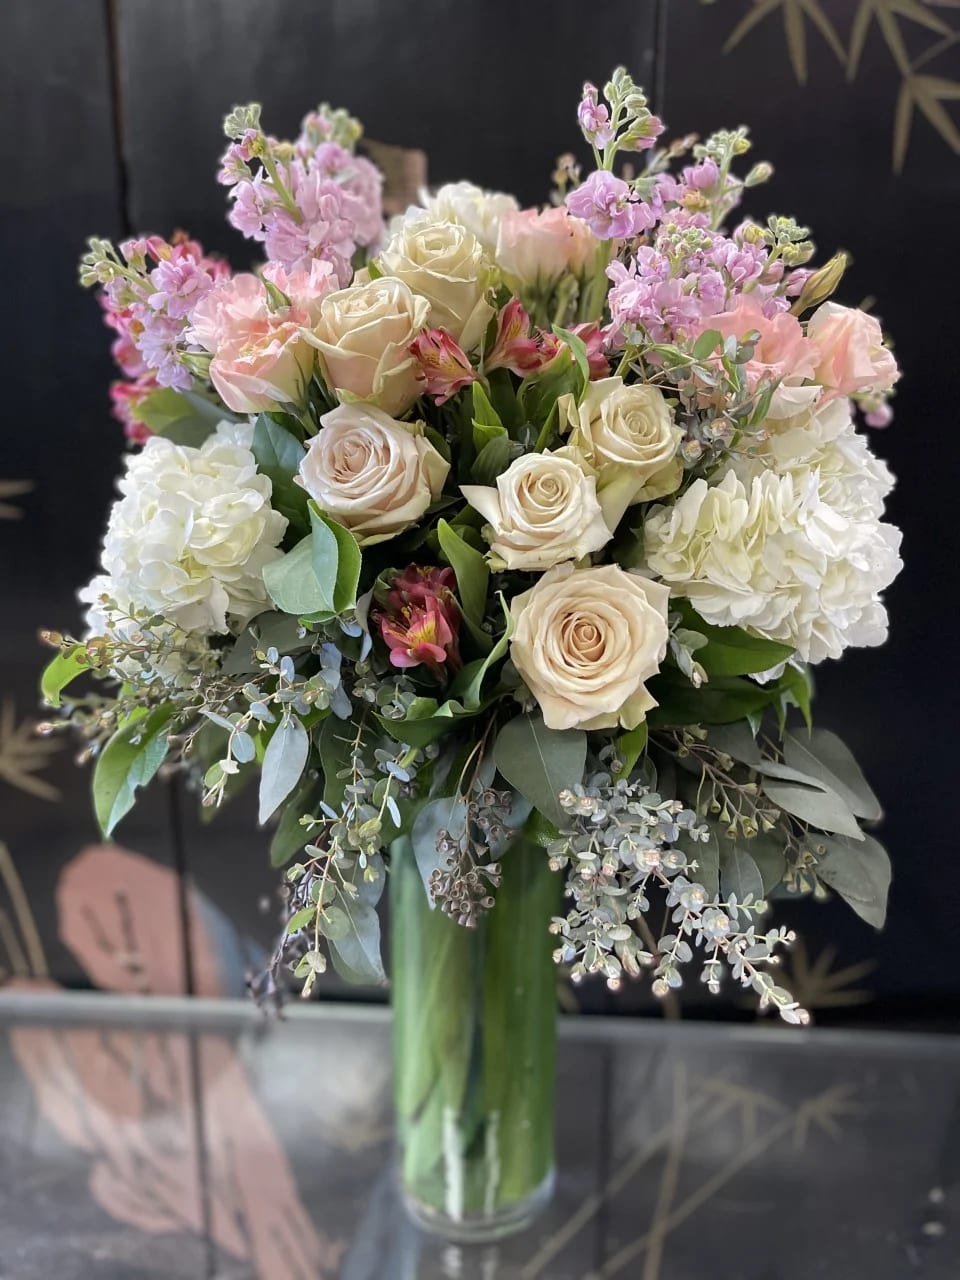 CREAM ROSES SURROUNDED BY HYDRANGEA AND MIX OF PINK FLOWERS AND LUSH